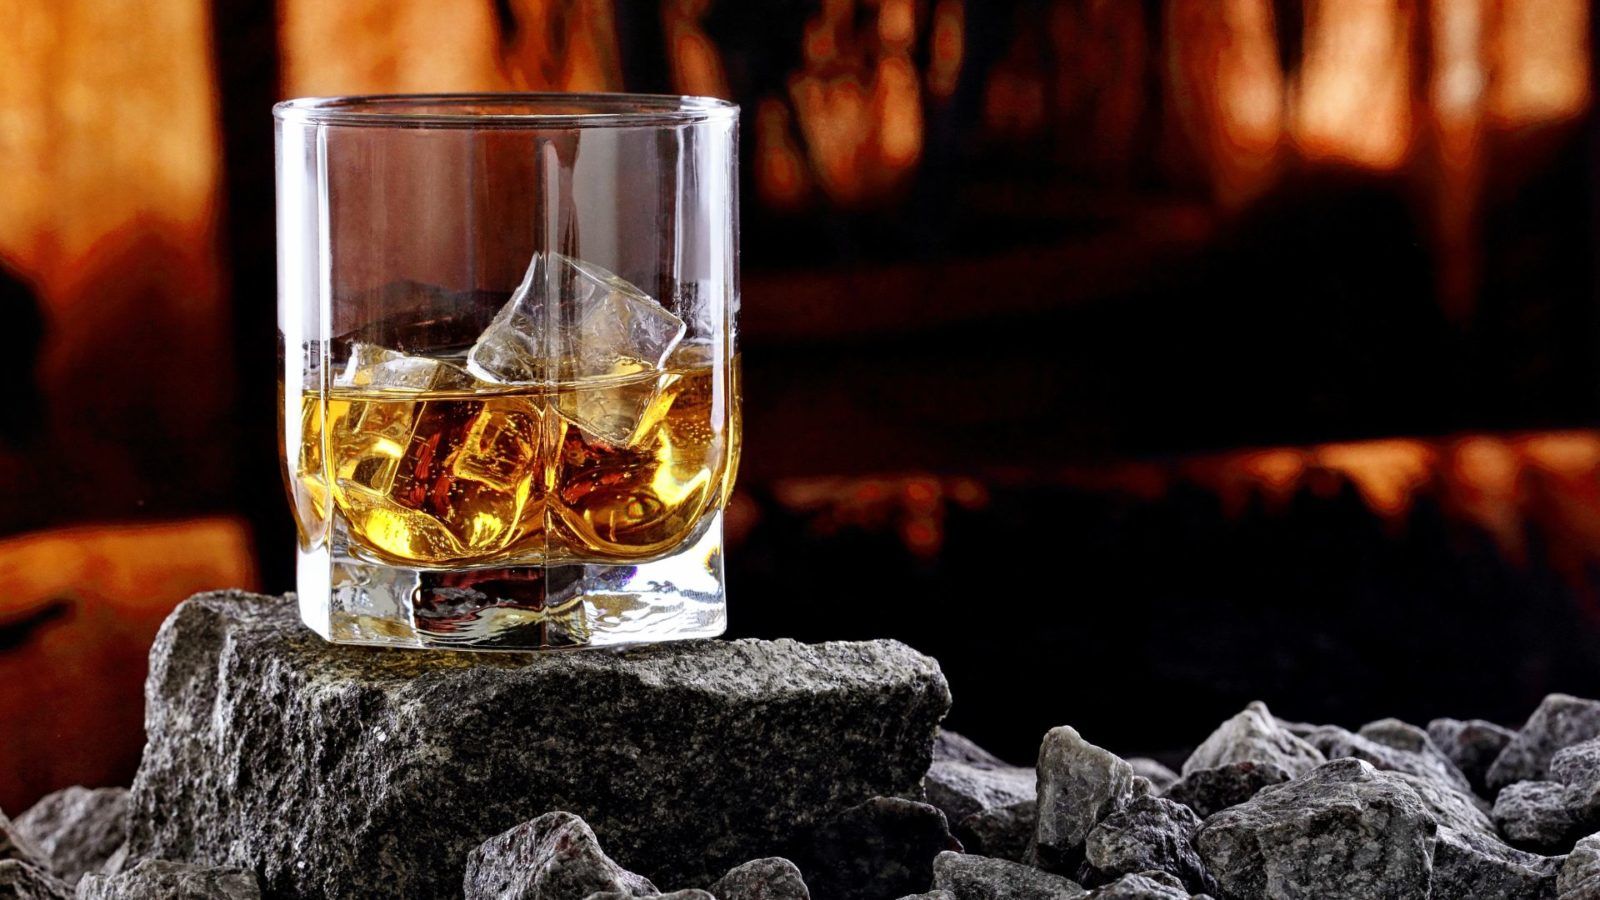 Bottled luxury: Most expensive whiskies in India for your on-the-rocks ritual